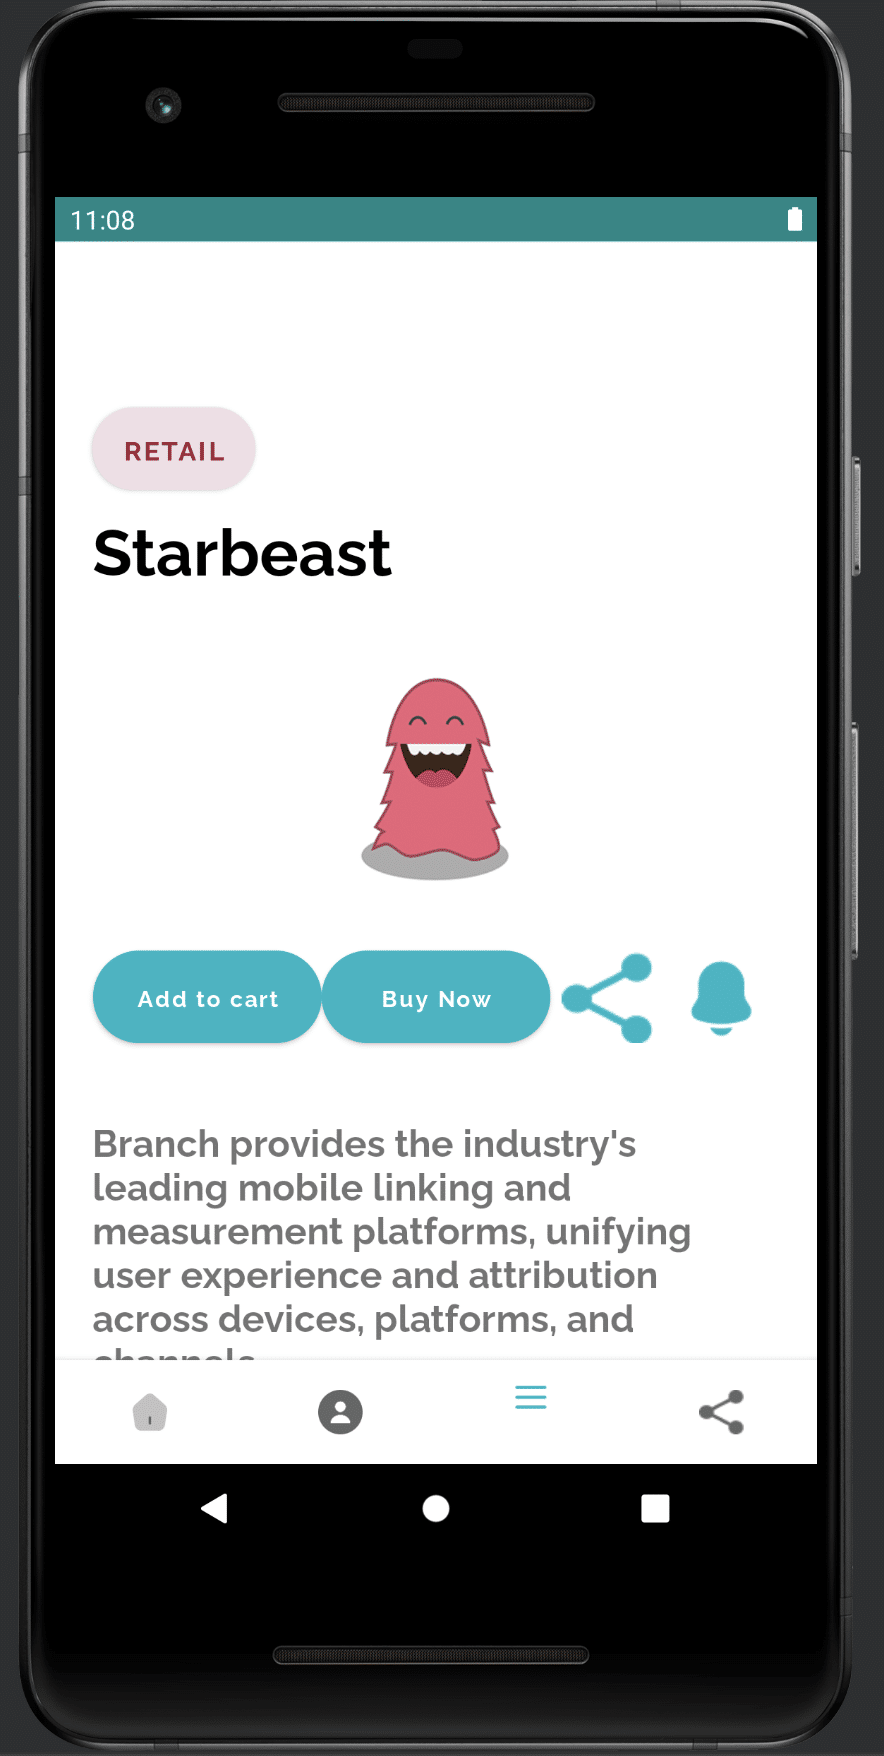 Screenshot of the details page for the Starbeast monster on the Branch MonsterSite shown on a phone screen.